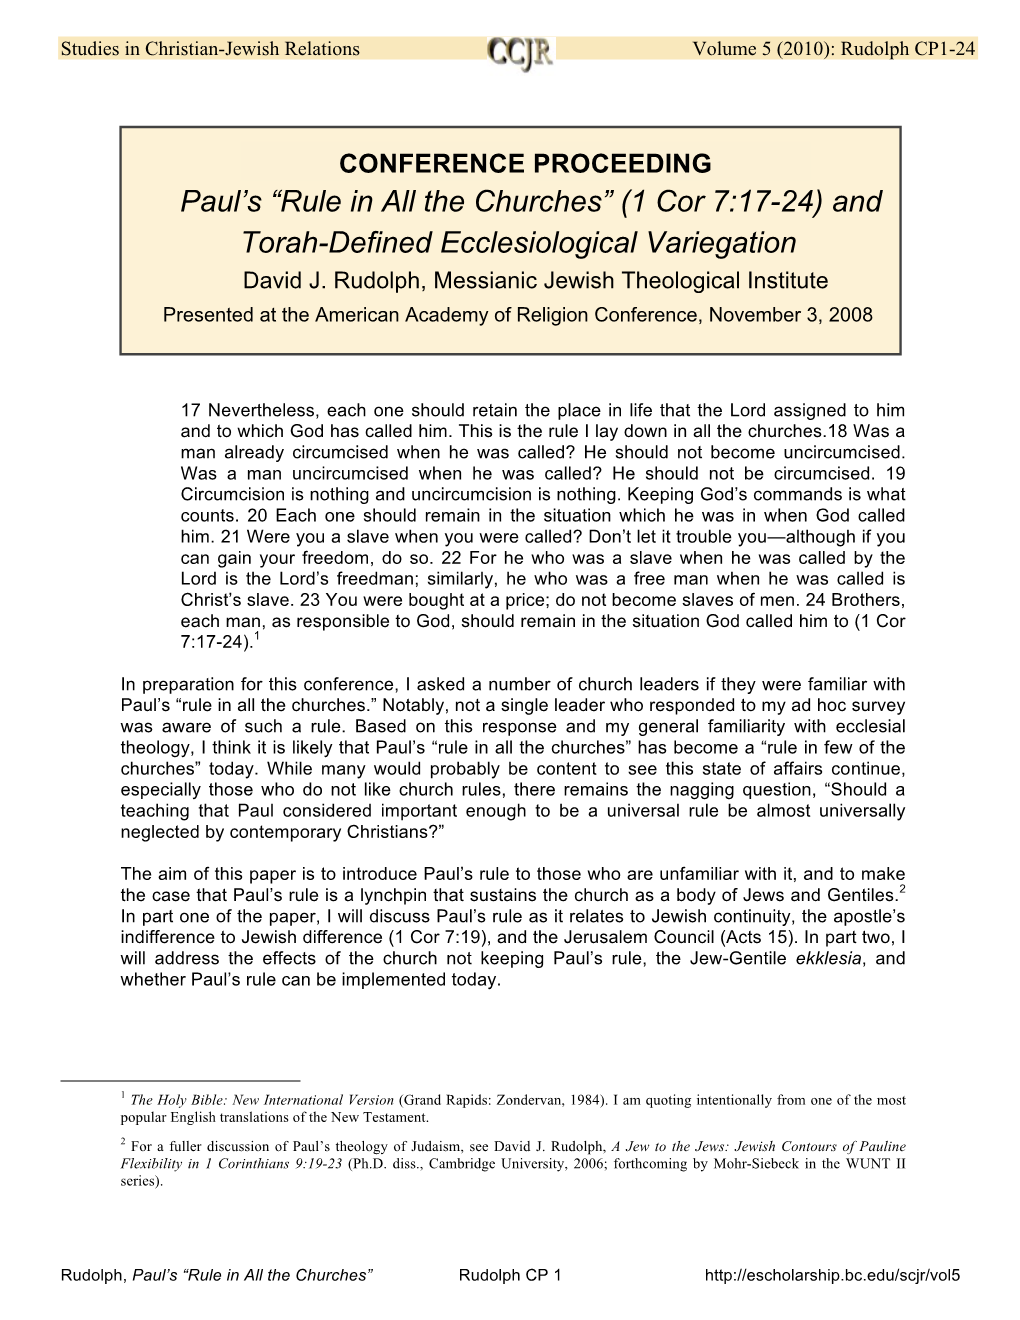 Paul's 'Rule in All the Churches' (1 Cor 7:17-24) and Torah